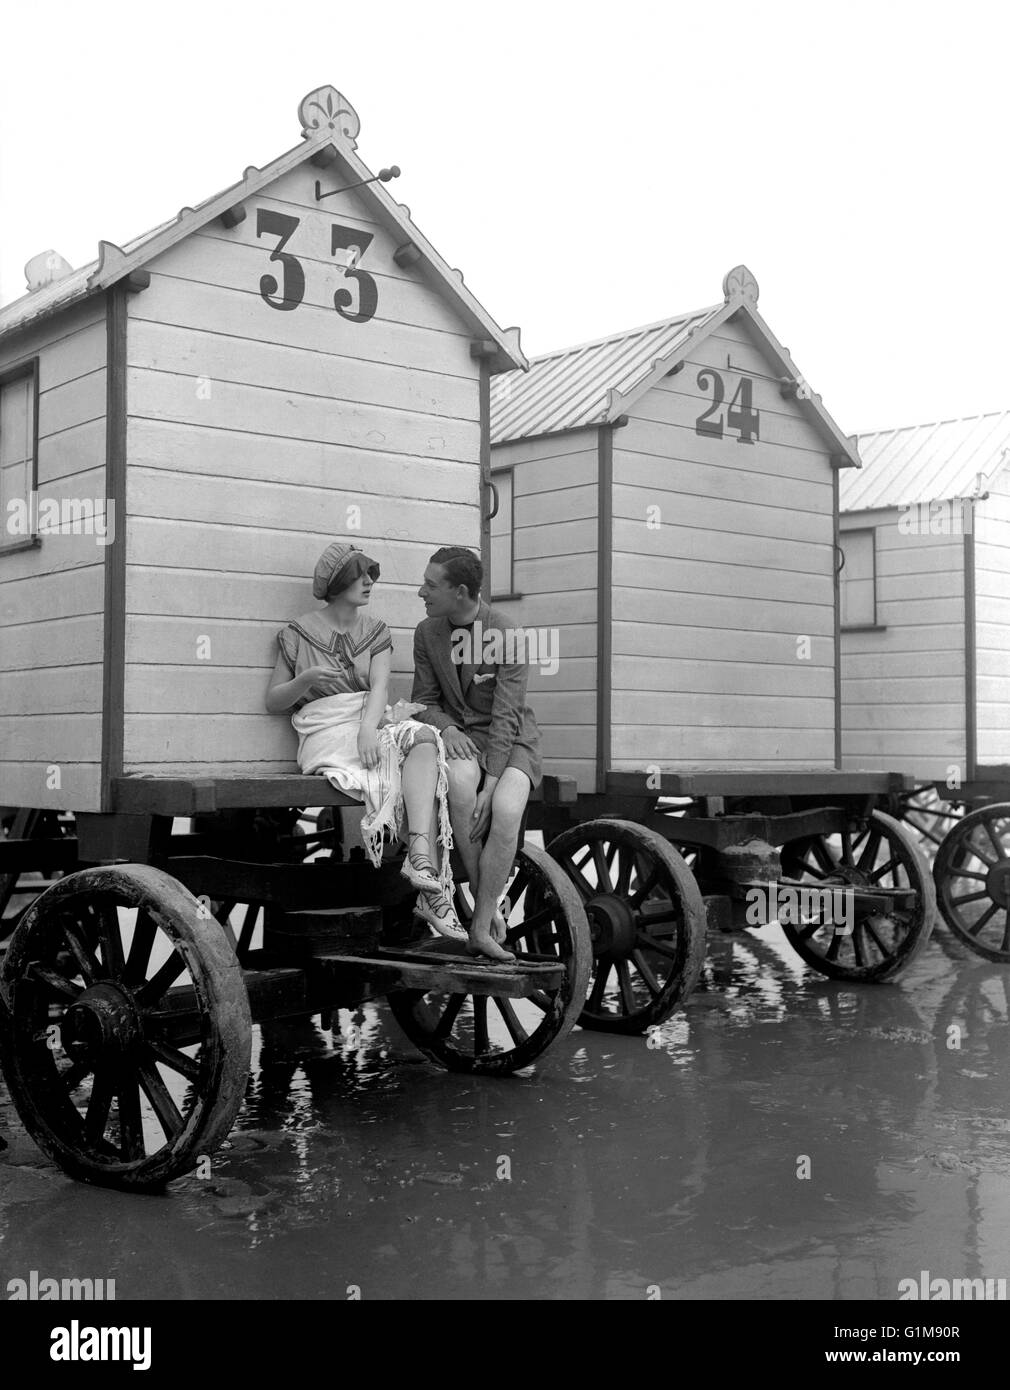 A couple chat while seated on a sea bathing hut at a British seaside resort. The huts were towed into the sea to spare the occupants the 'indignity' of making their way down the beach in their bathing costumes. ... Leisure and Tourism - The Seaside - Margate ... 01-08-1910 ... Margate ... UK ... Photo credit should read: PA/Unique Reference No. 1431736 ... Stock Photo